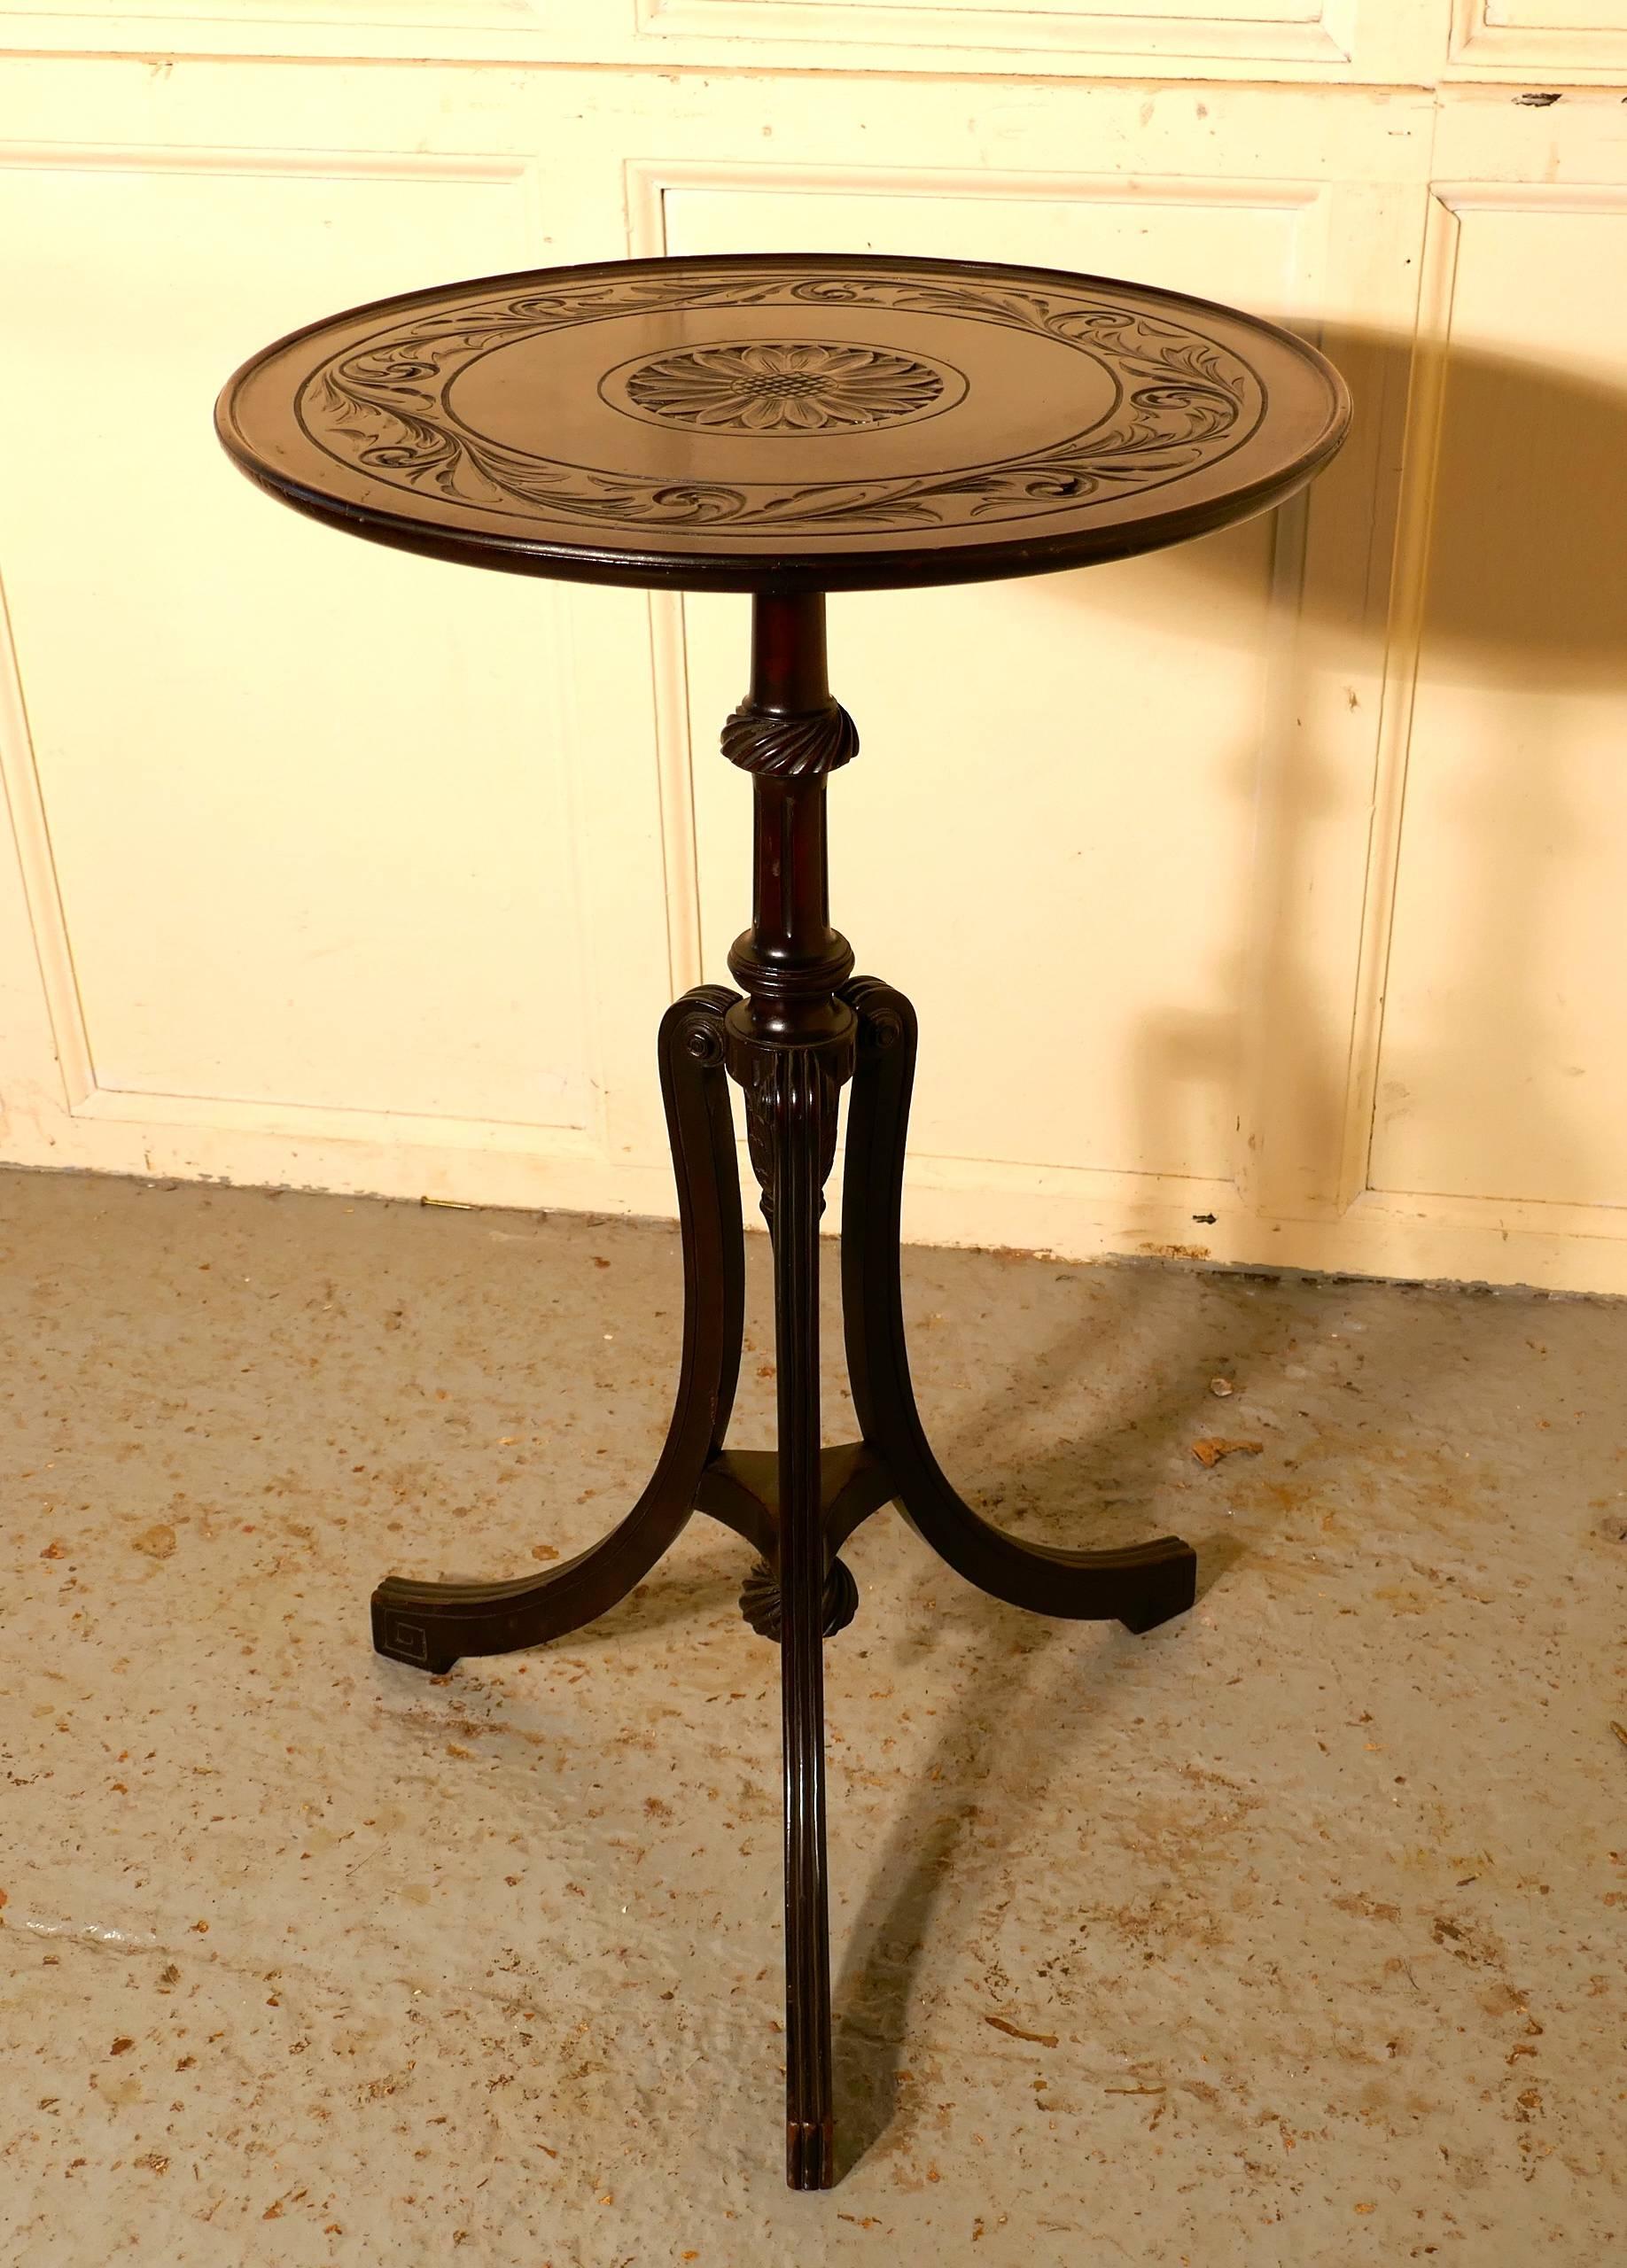 19th Century Carved Art Nouveau Mahogany Wine Table by Bulstrode of Cambridge